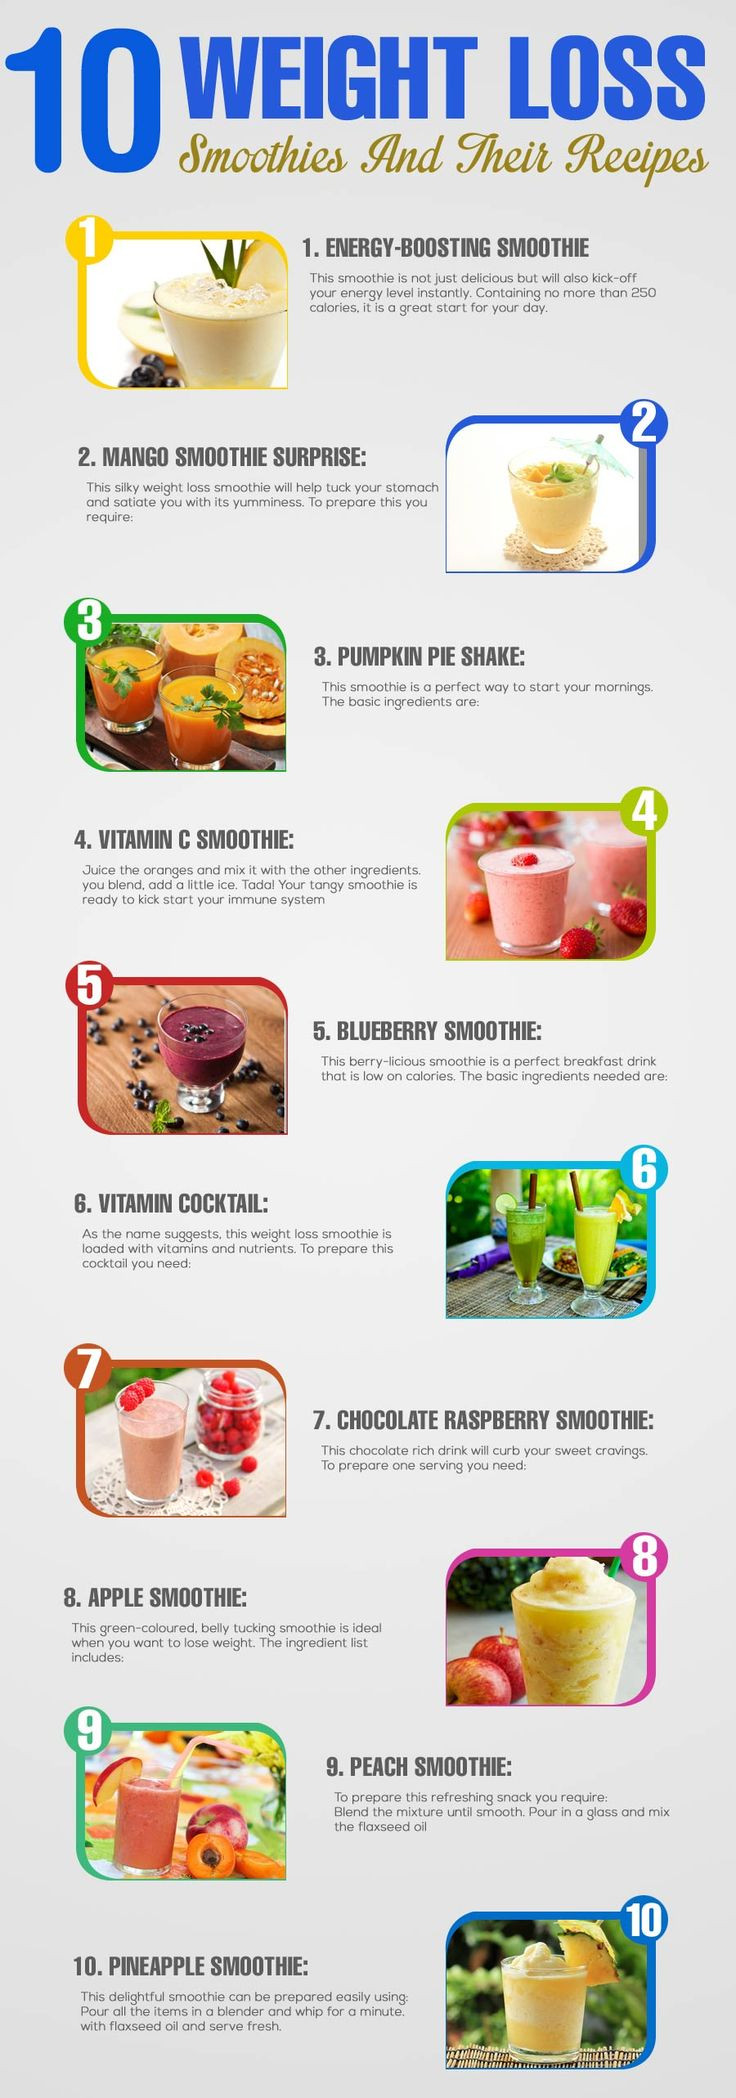 Low Calorie Smoothie Recipes For Weight Loss
 How to make healthy smoothies at home to lose weight